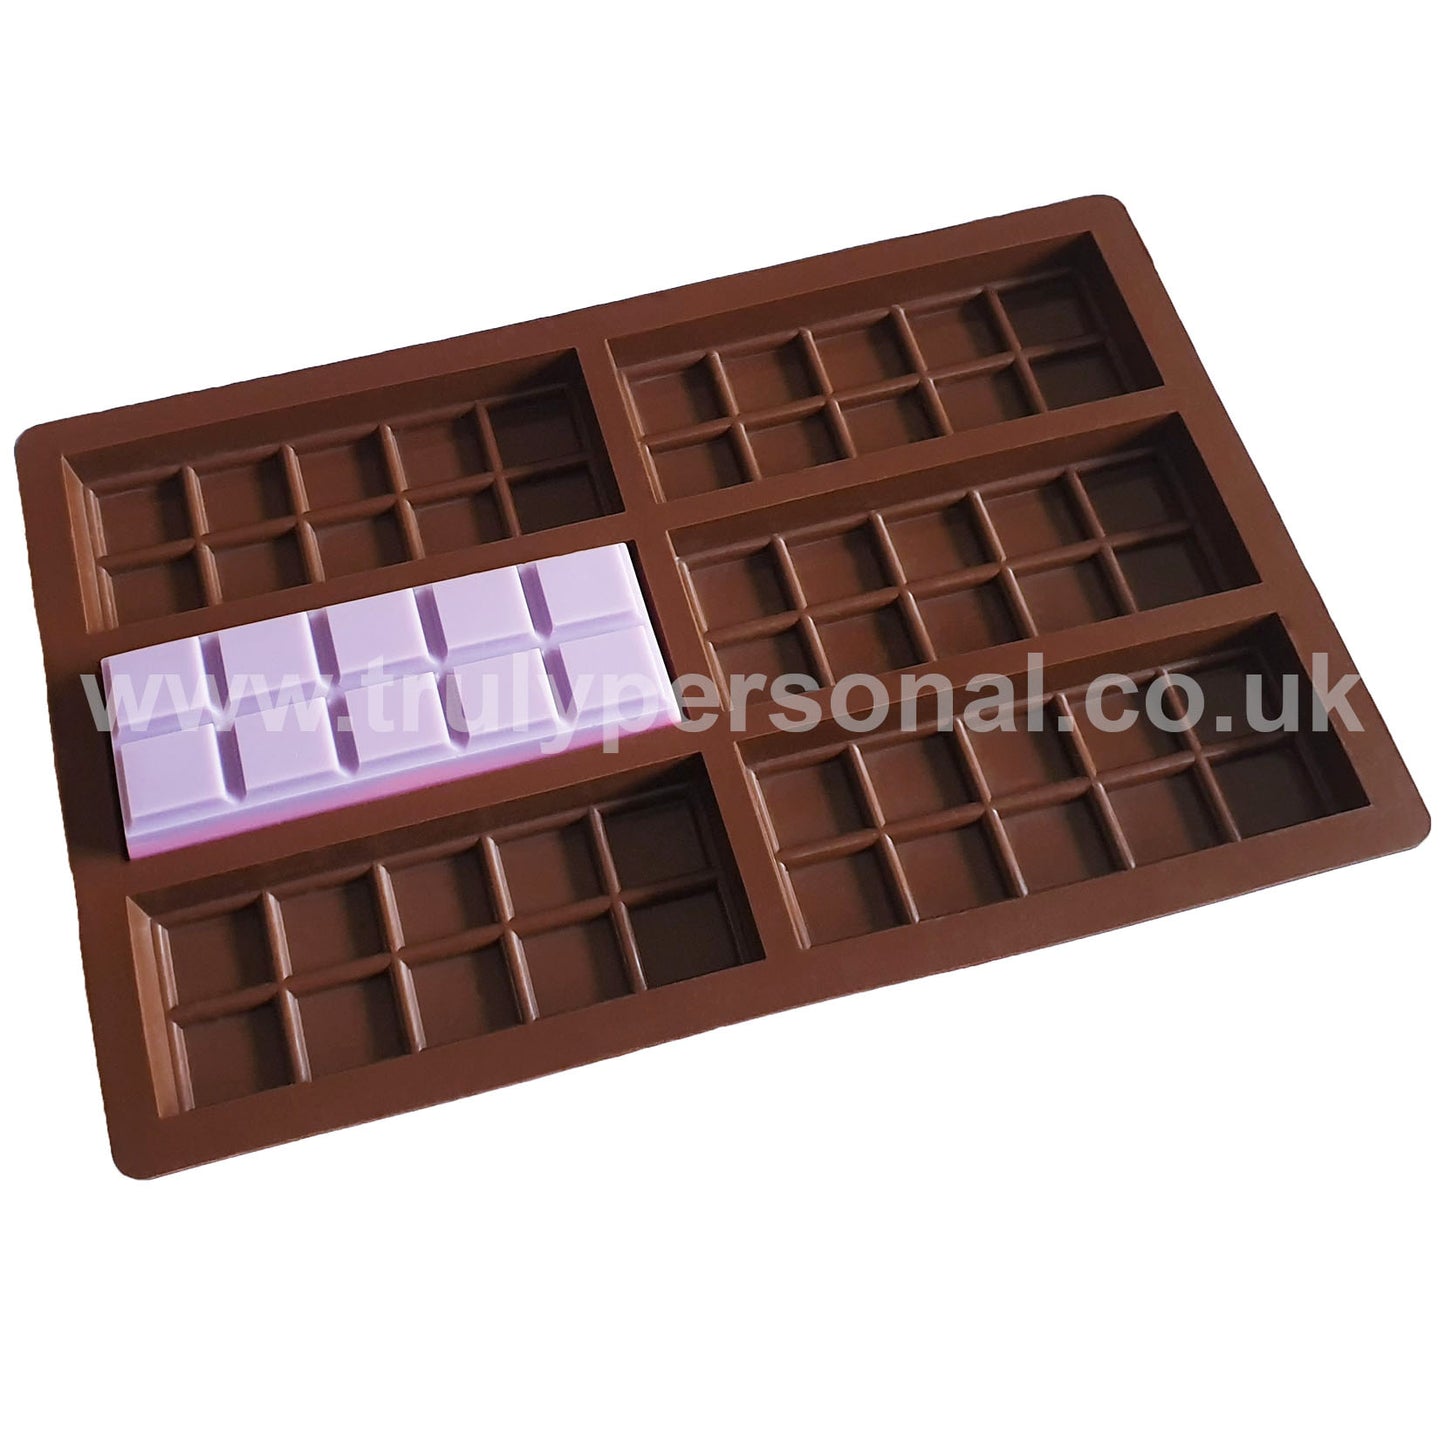 Snap Bar Silicone Mould - 6 x 10 | Wax Melts | Truly Personal Ltd